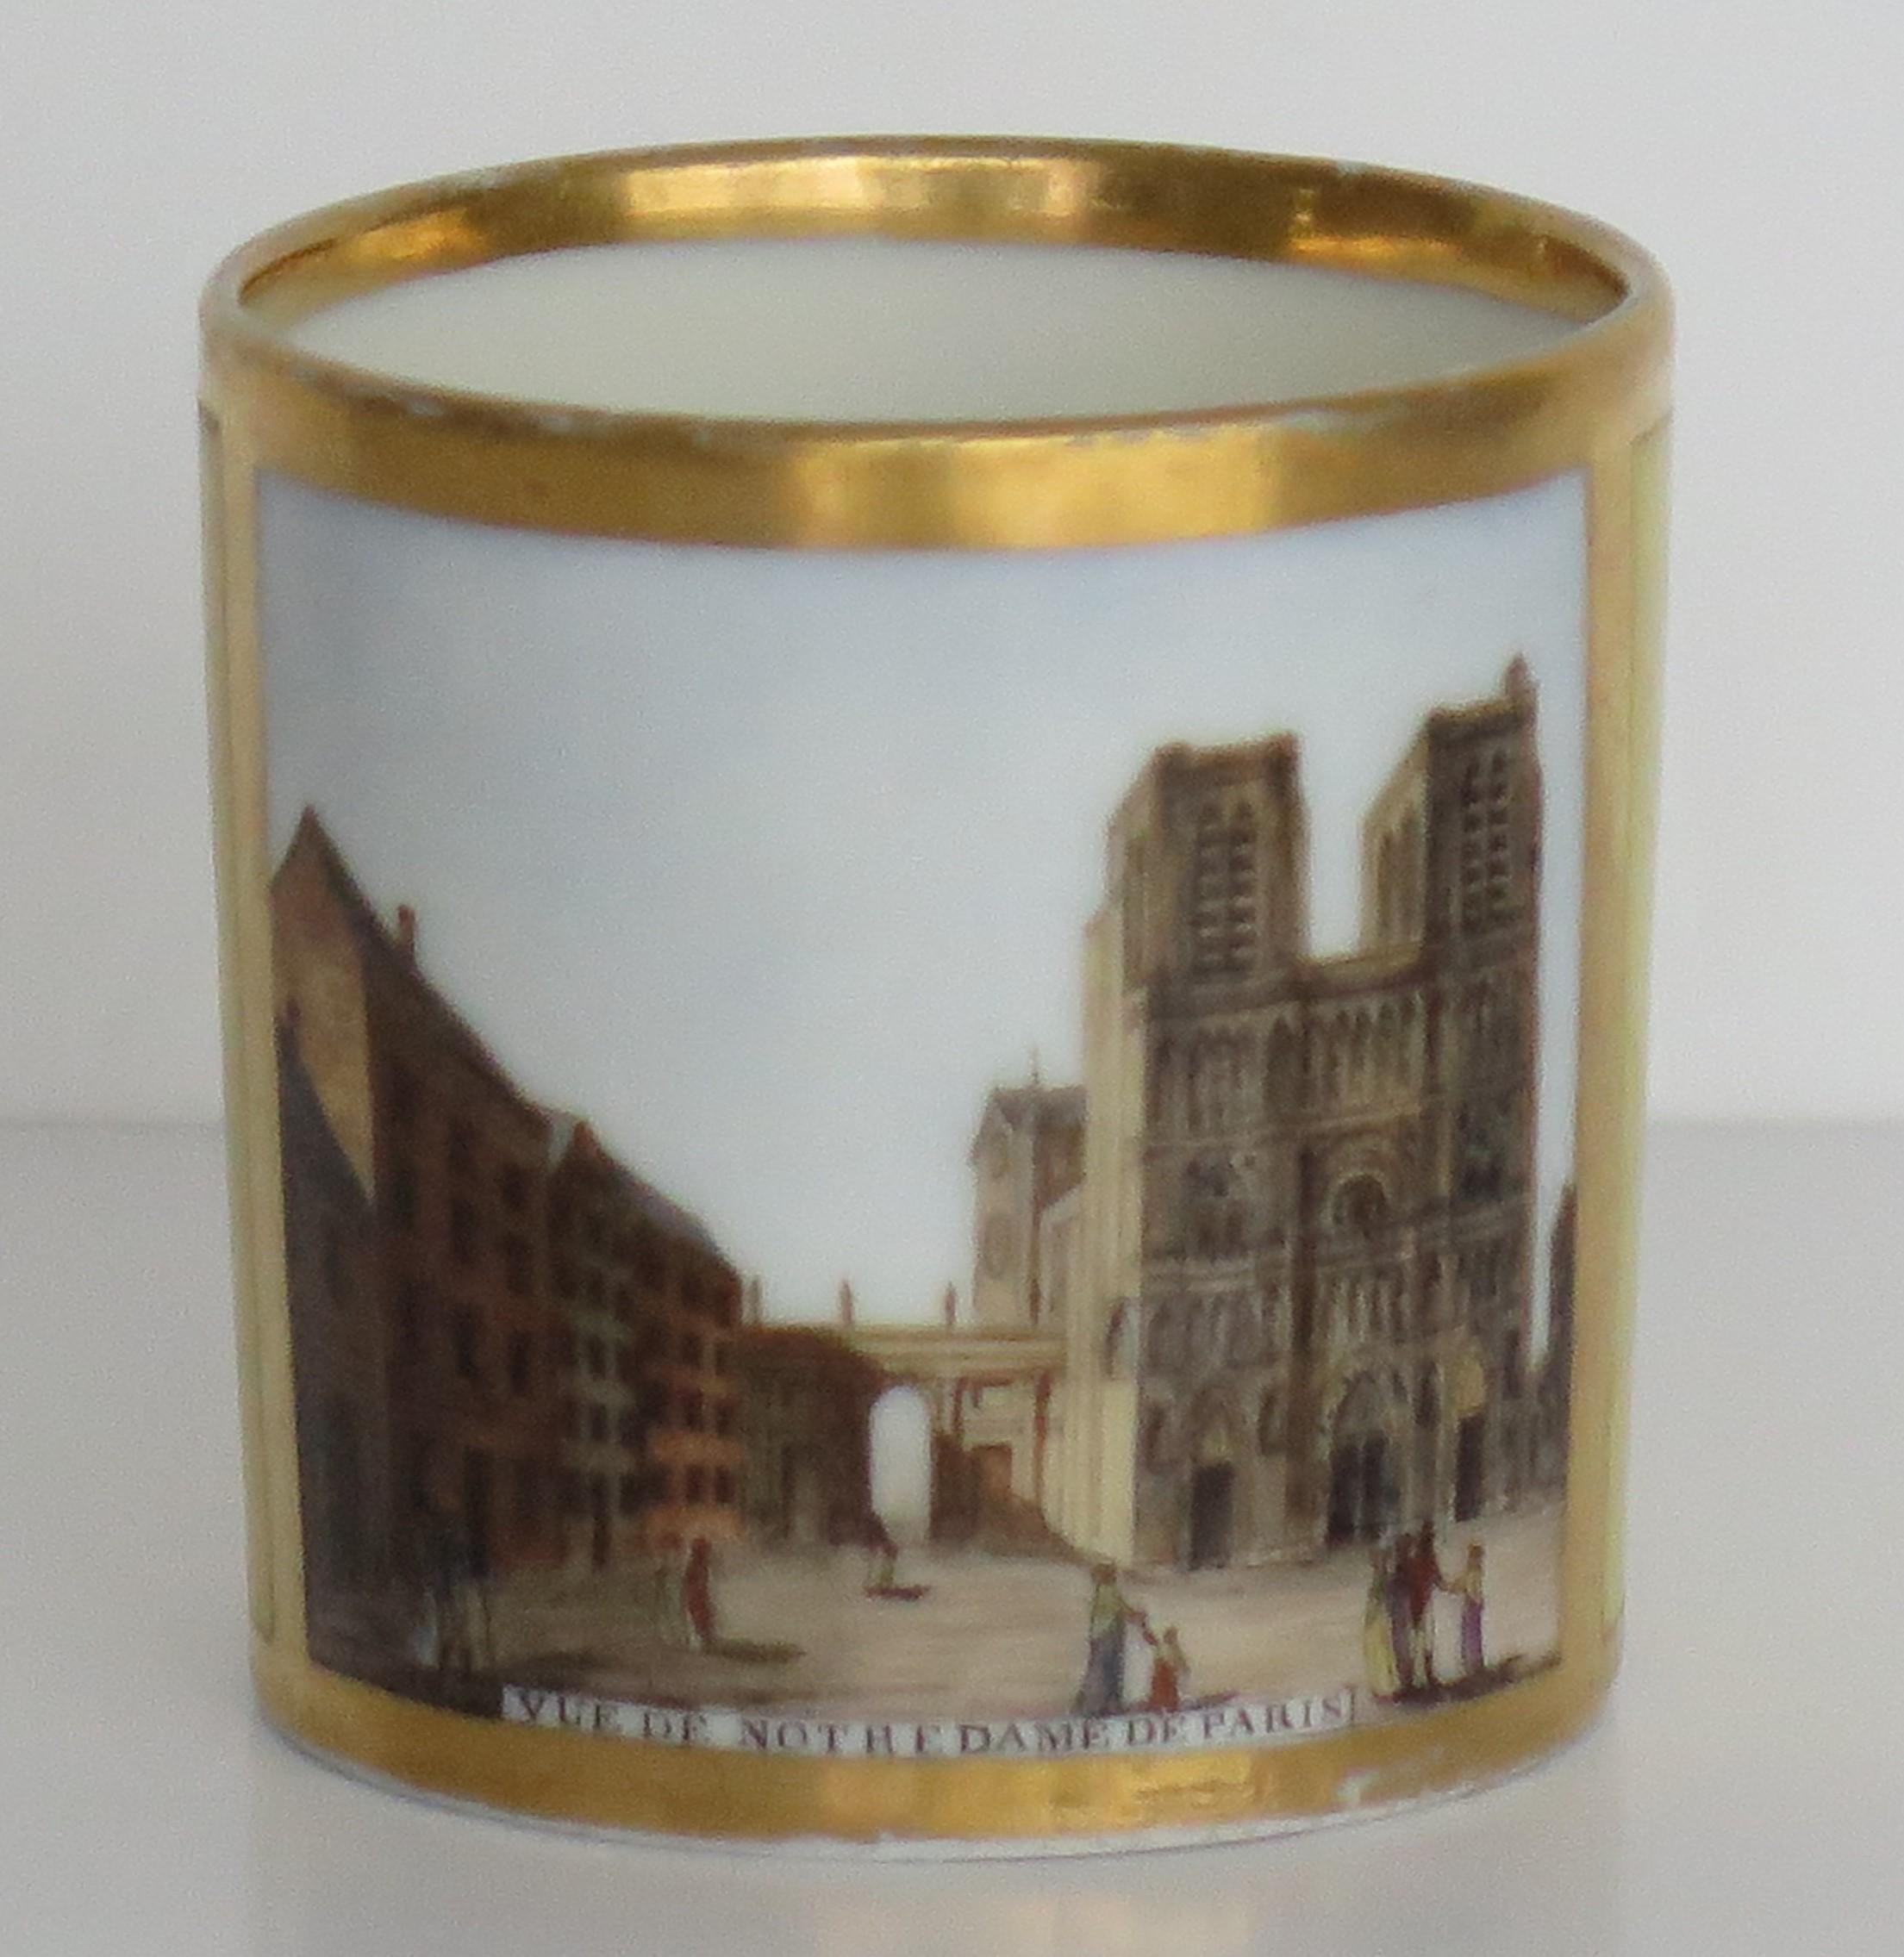 This is a very beautiful porcelain coffee can with a hand painted scene of Notre-Dame Cathedral, made by Paris, France, dating to the late 18th century, circa 1795.

The coffee can is broadly cylindrical tapering slightly to the base, with a ring